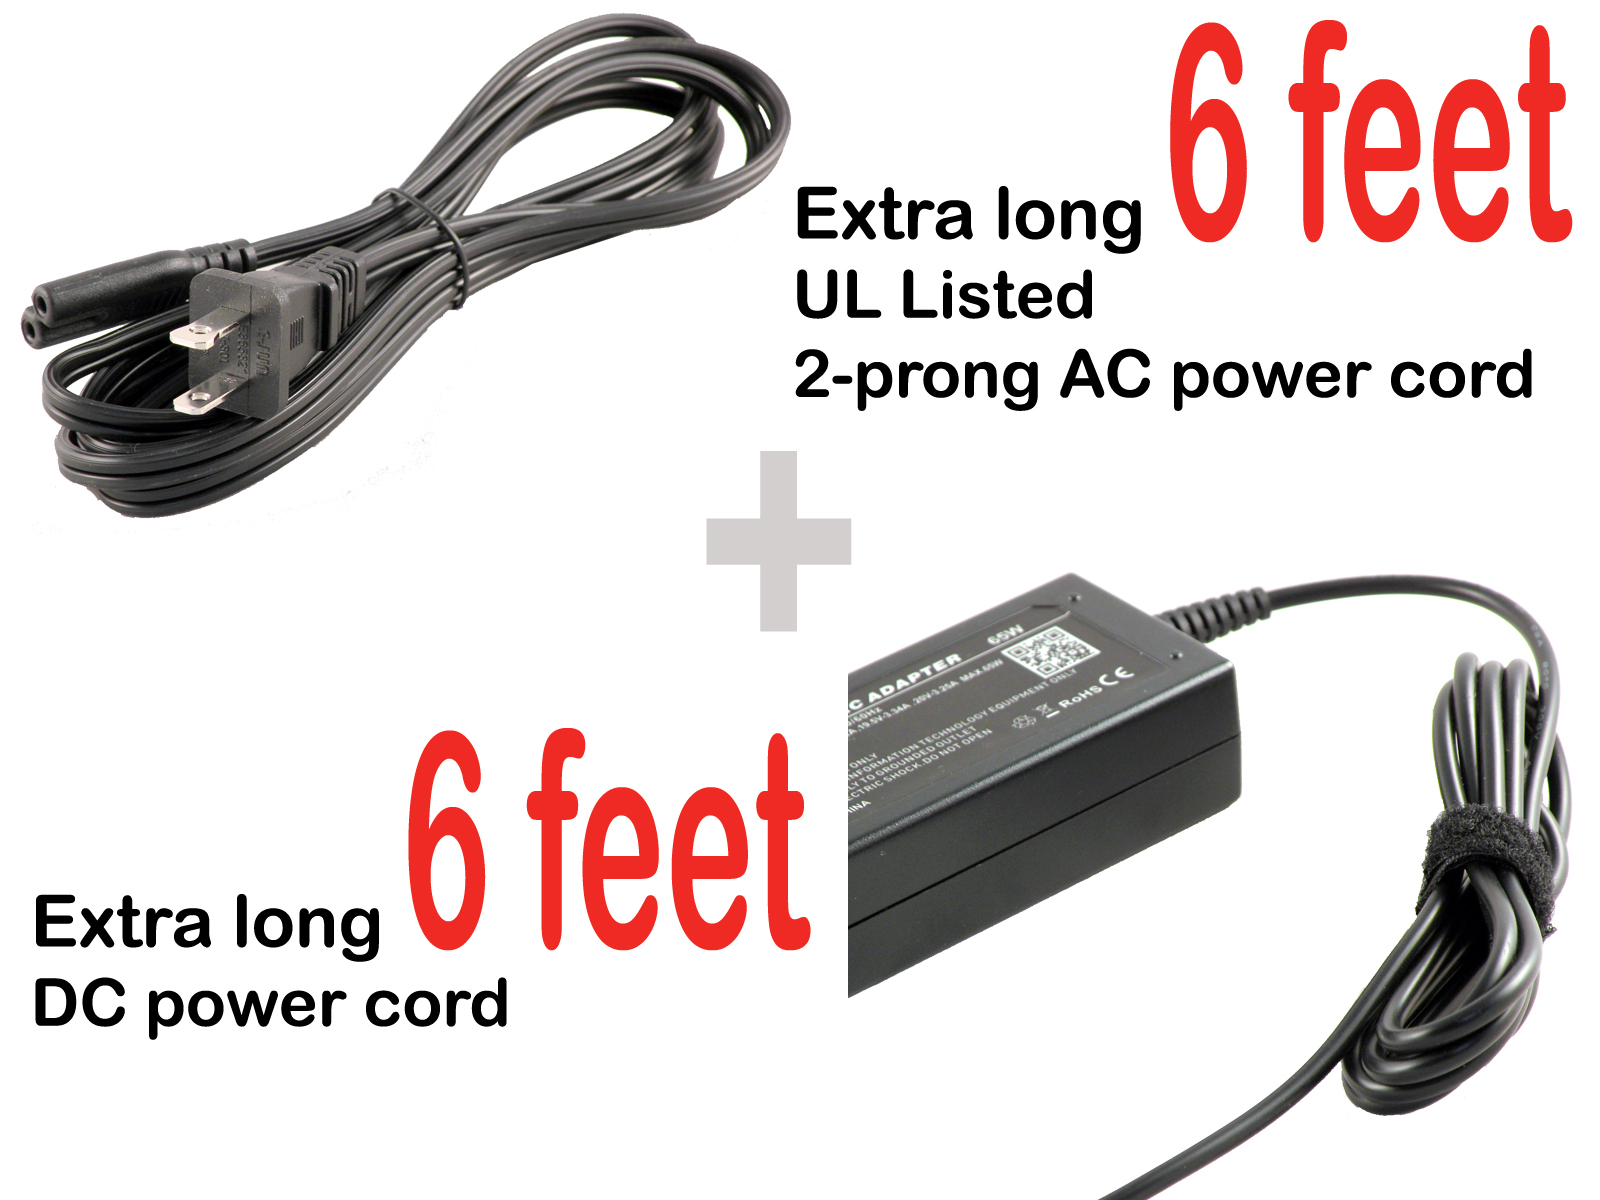 Laptop AC Adapter for Asus F505ZA-DB31 F505ZA-DH51 F510QA F510QA-WB91 F512DA F512DA-DB34 F512DA-EB51 F512DA-EB55 F512DA-EB55-BL F512DA-EB55-CL F512DA-EB55-SL F512DA-PB31 F512DA-PB31-BL F512DA-PB31-CL - image 4 of 6